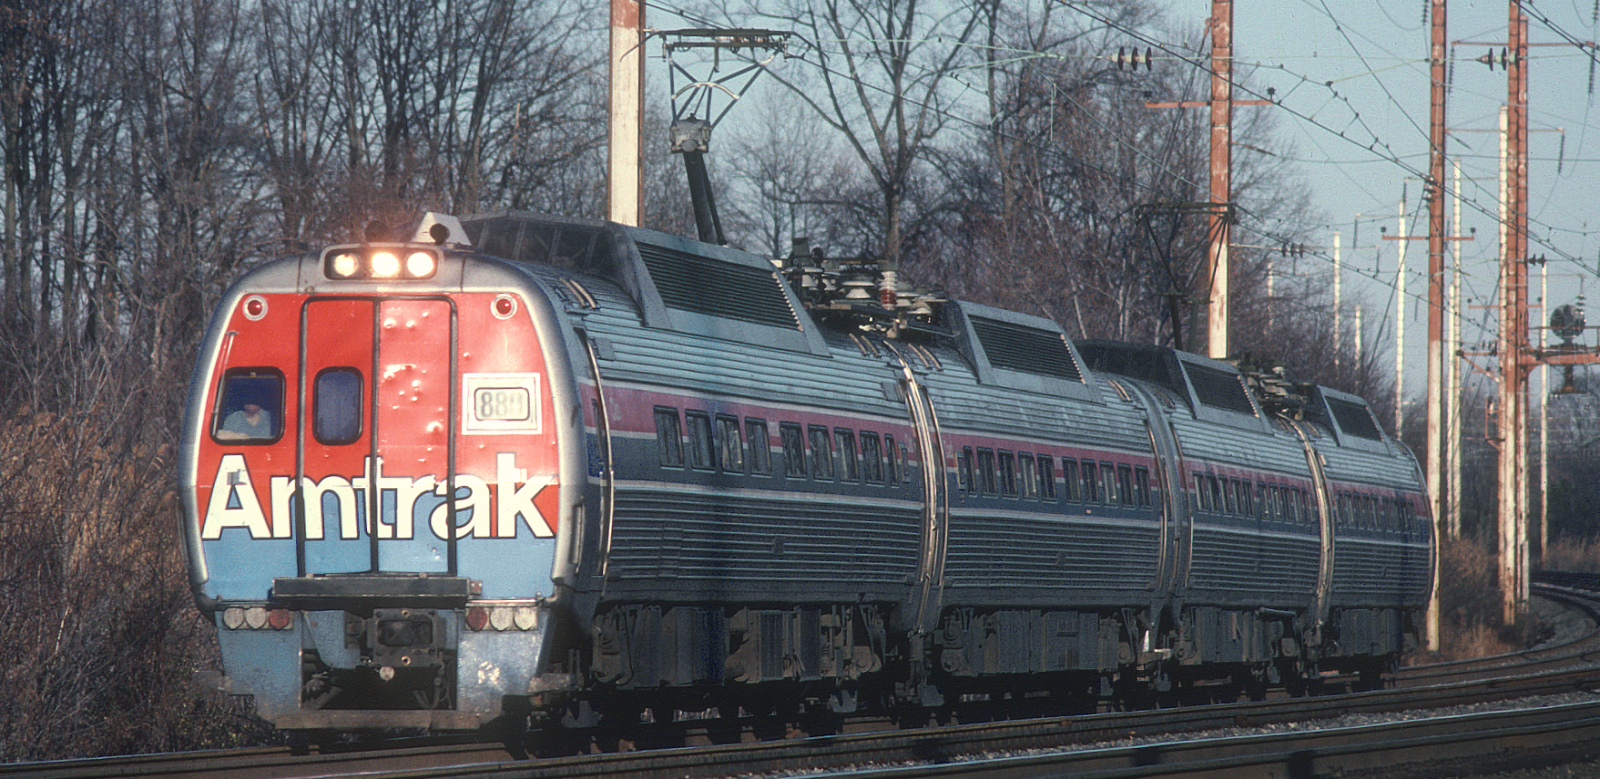 Two pairs in December 1980 in Bowie, Maryland